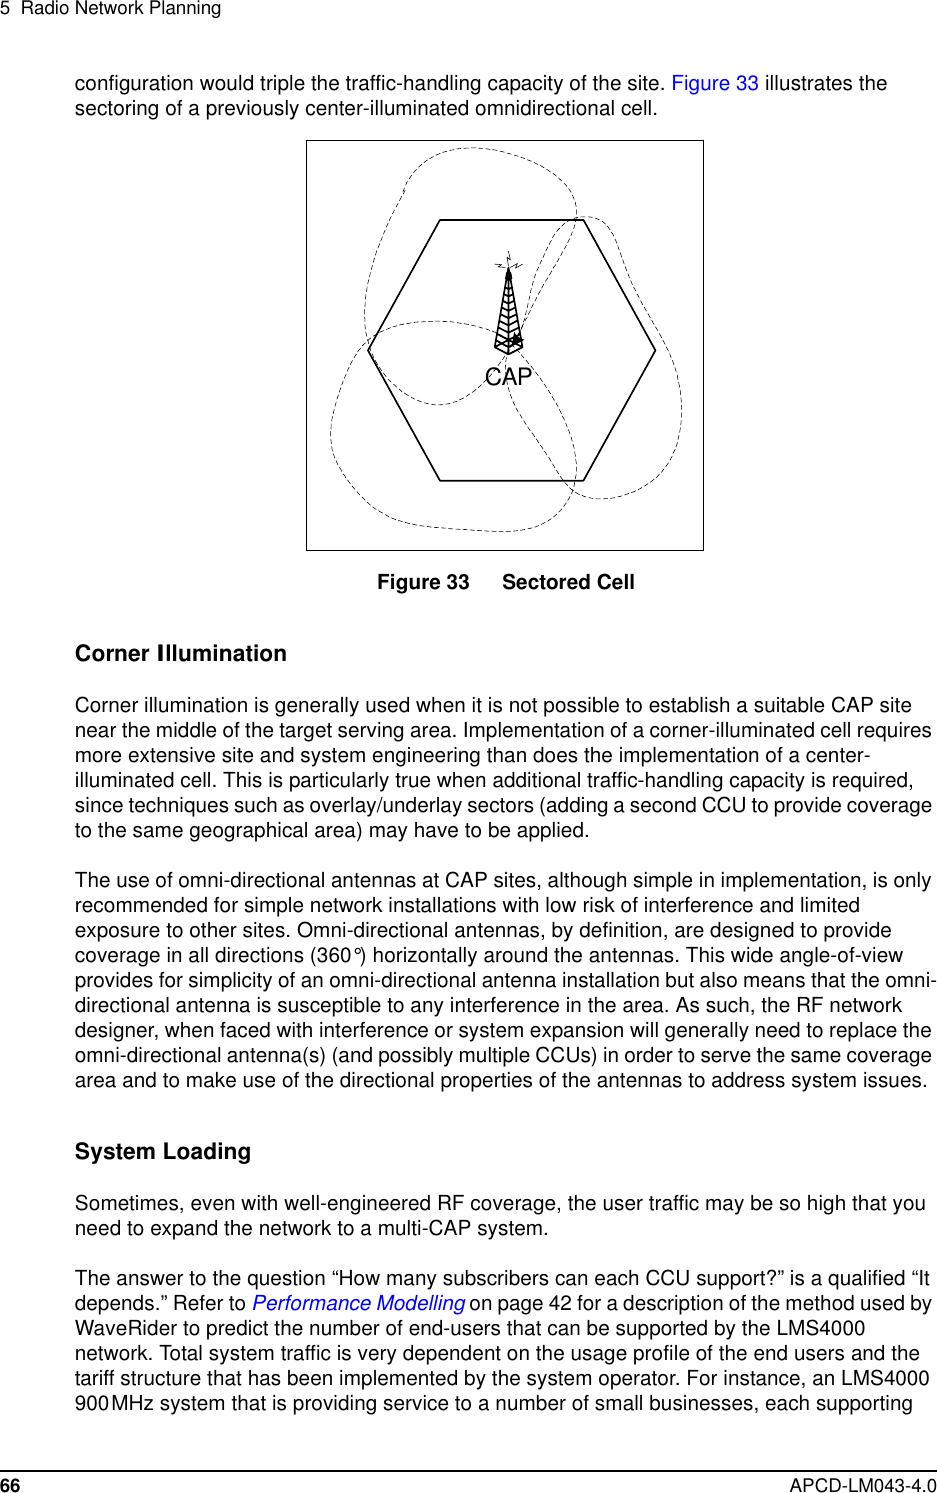 5 Radio Network Planning66 APCD-LM043-4.0configuration would triple the traffic-handling capacity of the site. Figure 33 illustrates thesectoring of a previously center-illuminated omnidirectional cell.Figure 33 Sectored CellCorner IlluminationCorner illumination is generally used when it is not possible to establish a suitable CAP sitenear the middle of the target serving area. Implementation of a corner-illuminated cell requiresmore extensive site and system engineering than does the implementation of a center-illuminated cell. This is particularly true when additional traffic-handling capacity is required,since techniques such as overlay/underlay sectors (adding a second CCU to provide coverageto the same geographical area) may have to be applied.The use of omni-directional antennas at CAP sites, although simple in implementation, is onlyrecommended for simple network installations with low risk of interference and limitedexposure to other sites. Omni-directional antennas, by definition, are designed to providecoverage in all directions (360°) horizontally around the antennas. This wide angle-of-viewprovides for simplicity of an omni-directional antenna installation but also means that the omni-directional antenna is susceptible to any interference in the area. As such, the RF networkdesigner, when faced with interference or system expansion will generally need to replace theomni-directional antenna(s) (and possibly multiple CCUs) in order to serve the same coveragearea and to make use of the directional properties of the antennas to address system issues.System LoadingSometimes, even with well-engineered RF coverage, the user traffic may be so high that youneed to expand the network to a multi-CAP system.The answer to the question “How many subscribers can each CCU support?” is a qualified “Itdepends.” Refer to Performance Modelling on page 42 for a description of the method used byWaveRider to predict the number of end-users that can be supported by the LMS4000network. Total system traffic is very dependent on the usage profile of the end users and thetariff structure that has been implemented by the system operator. For instance, an LMS4000900MHz system that is providing service to a number of small businesses, each supportingCAP